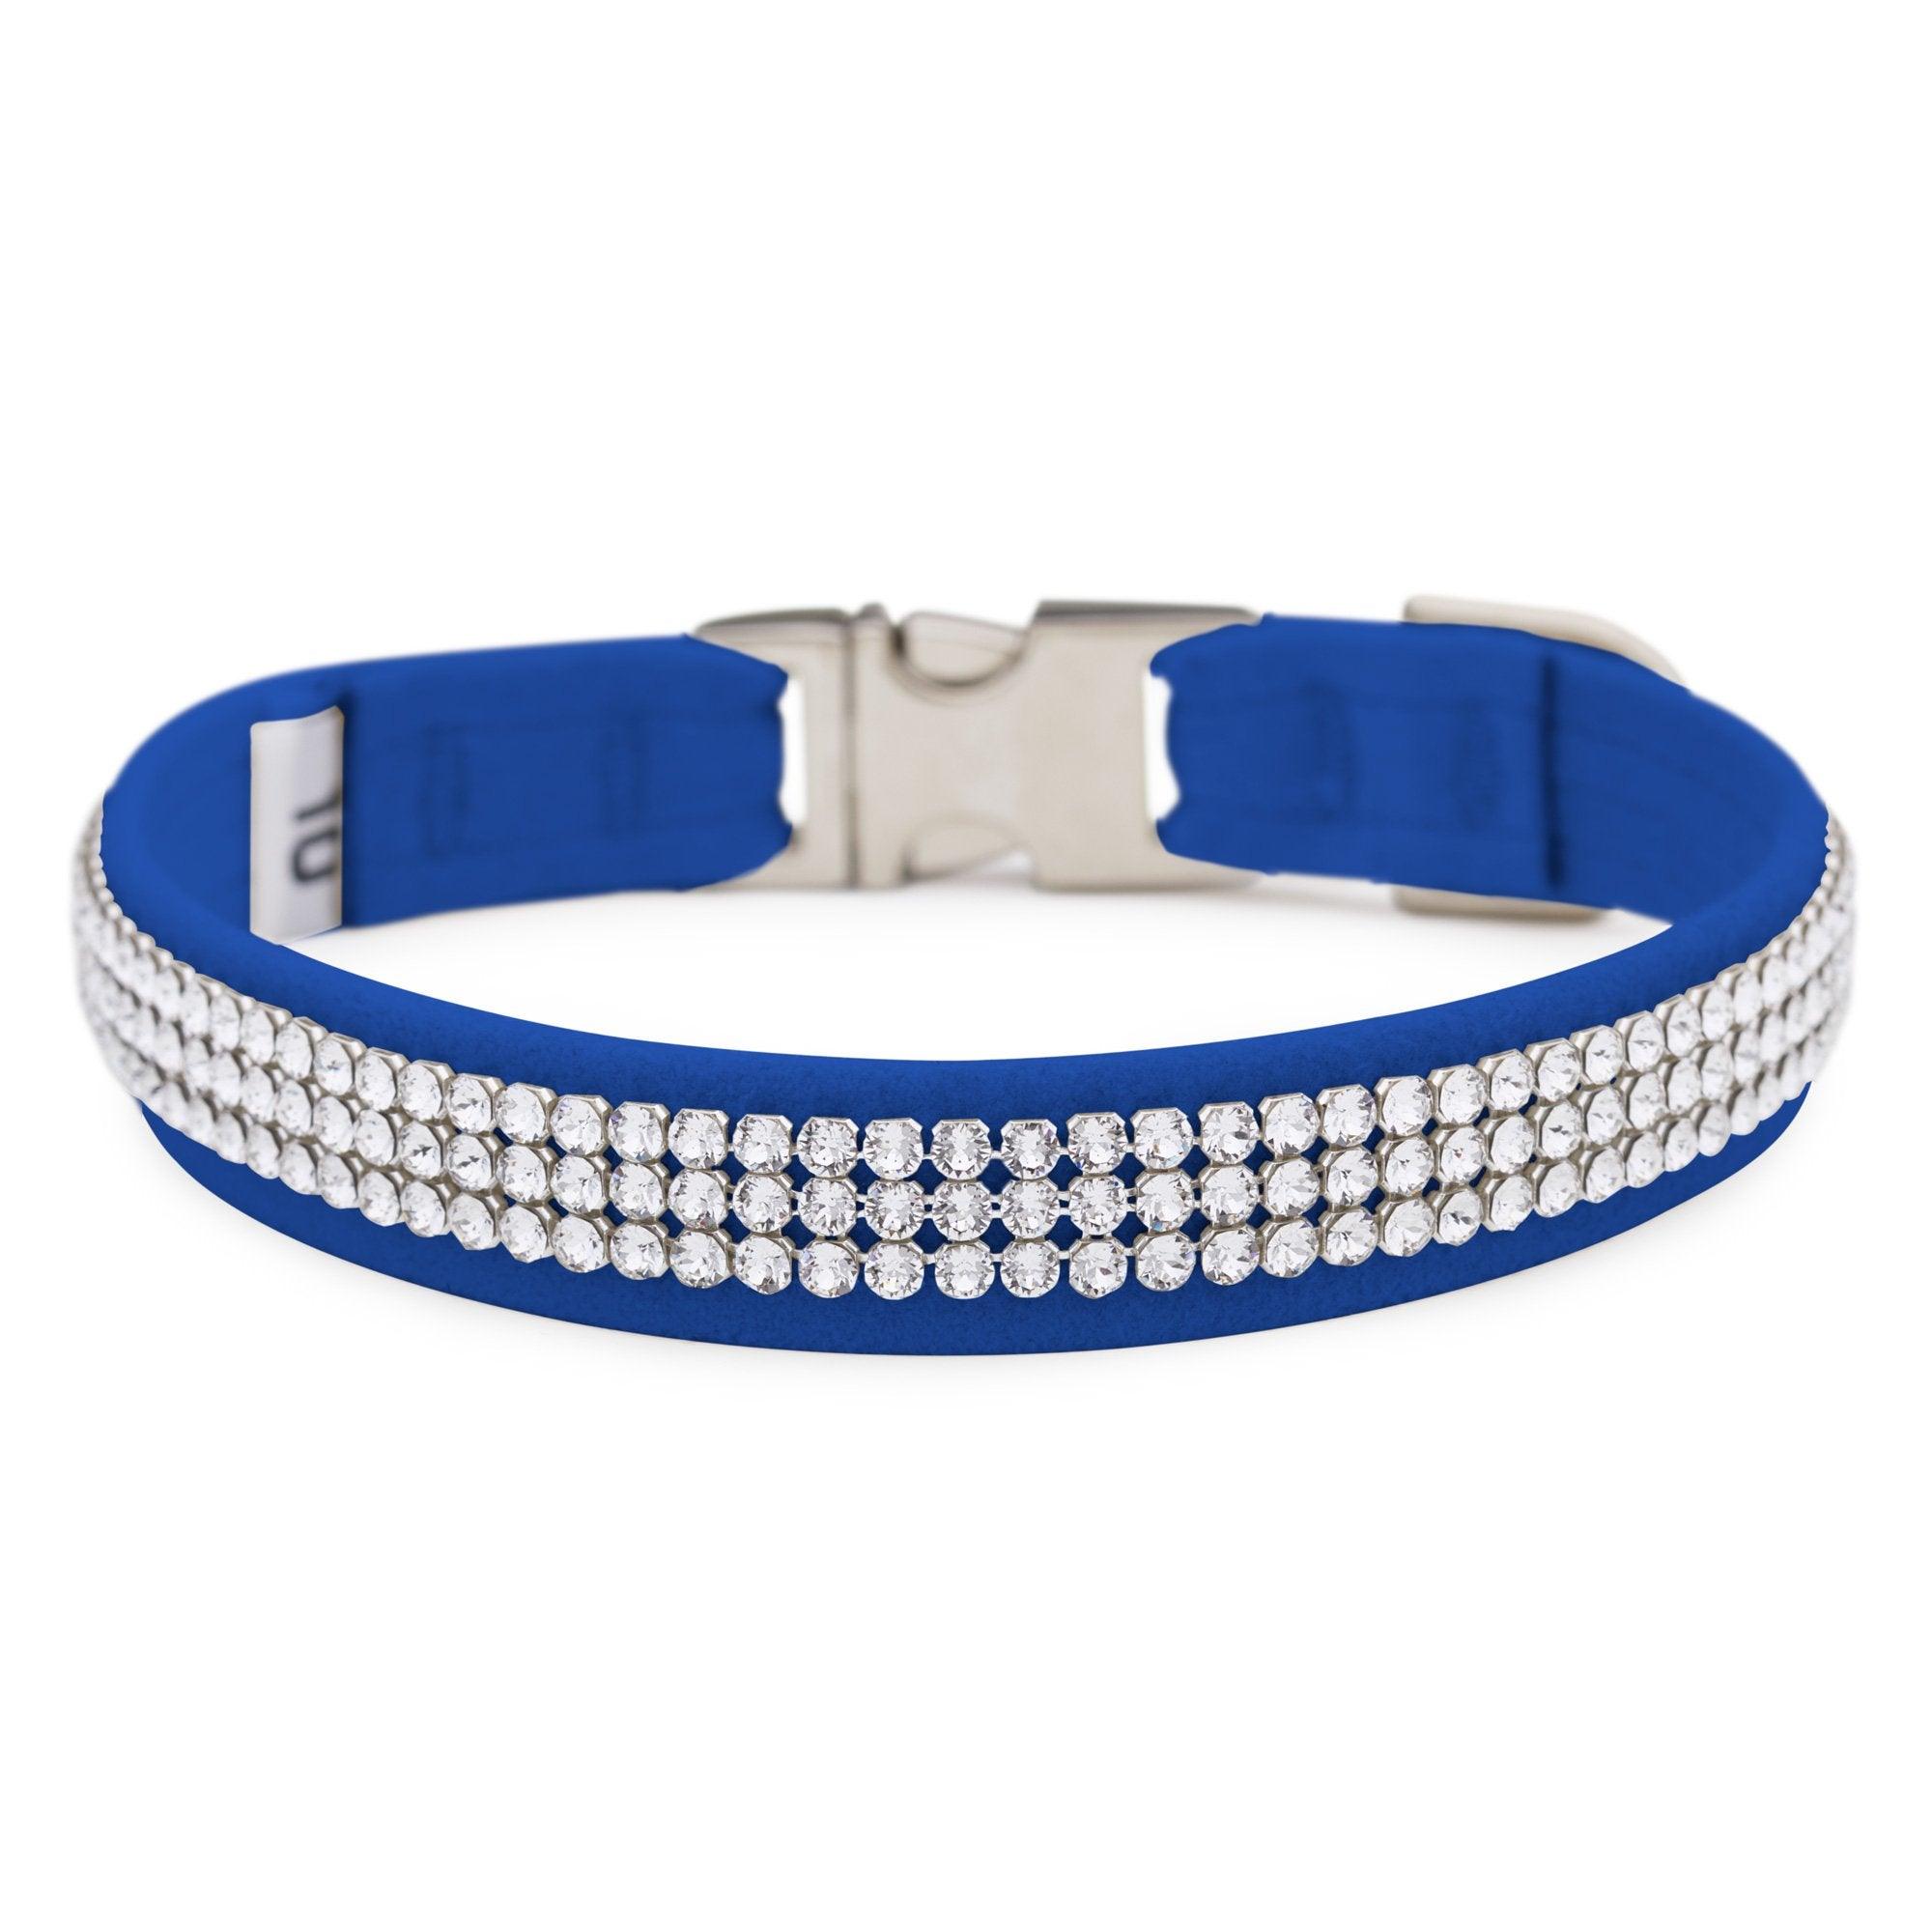 Royal Blue 3 Row Giltmore Perfect Fit Collar - Rocky & Maggie's Pet Boutique and Salon